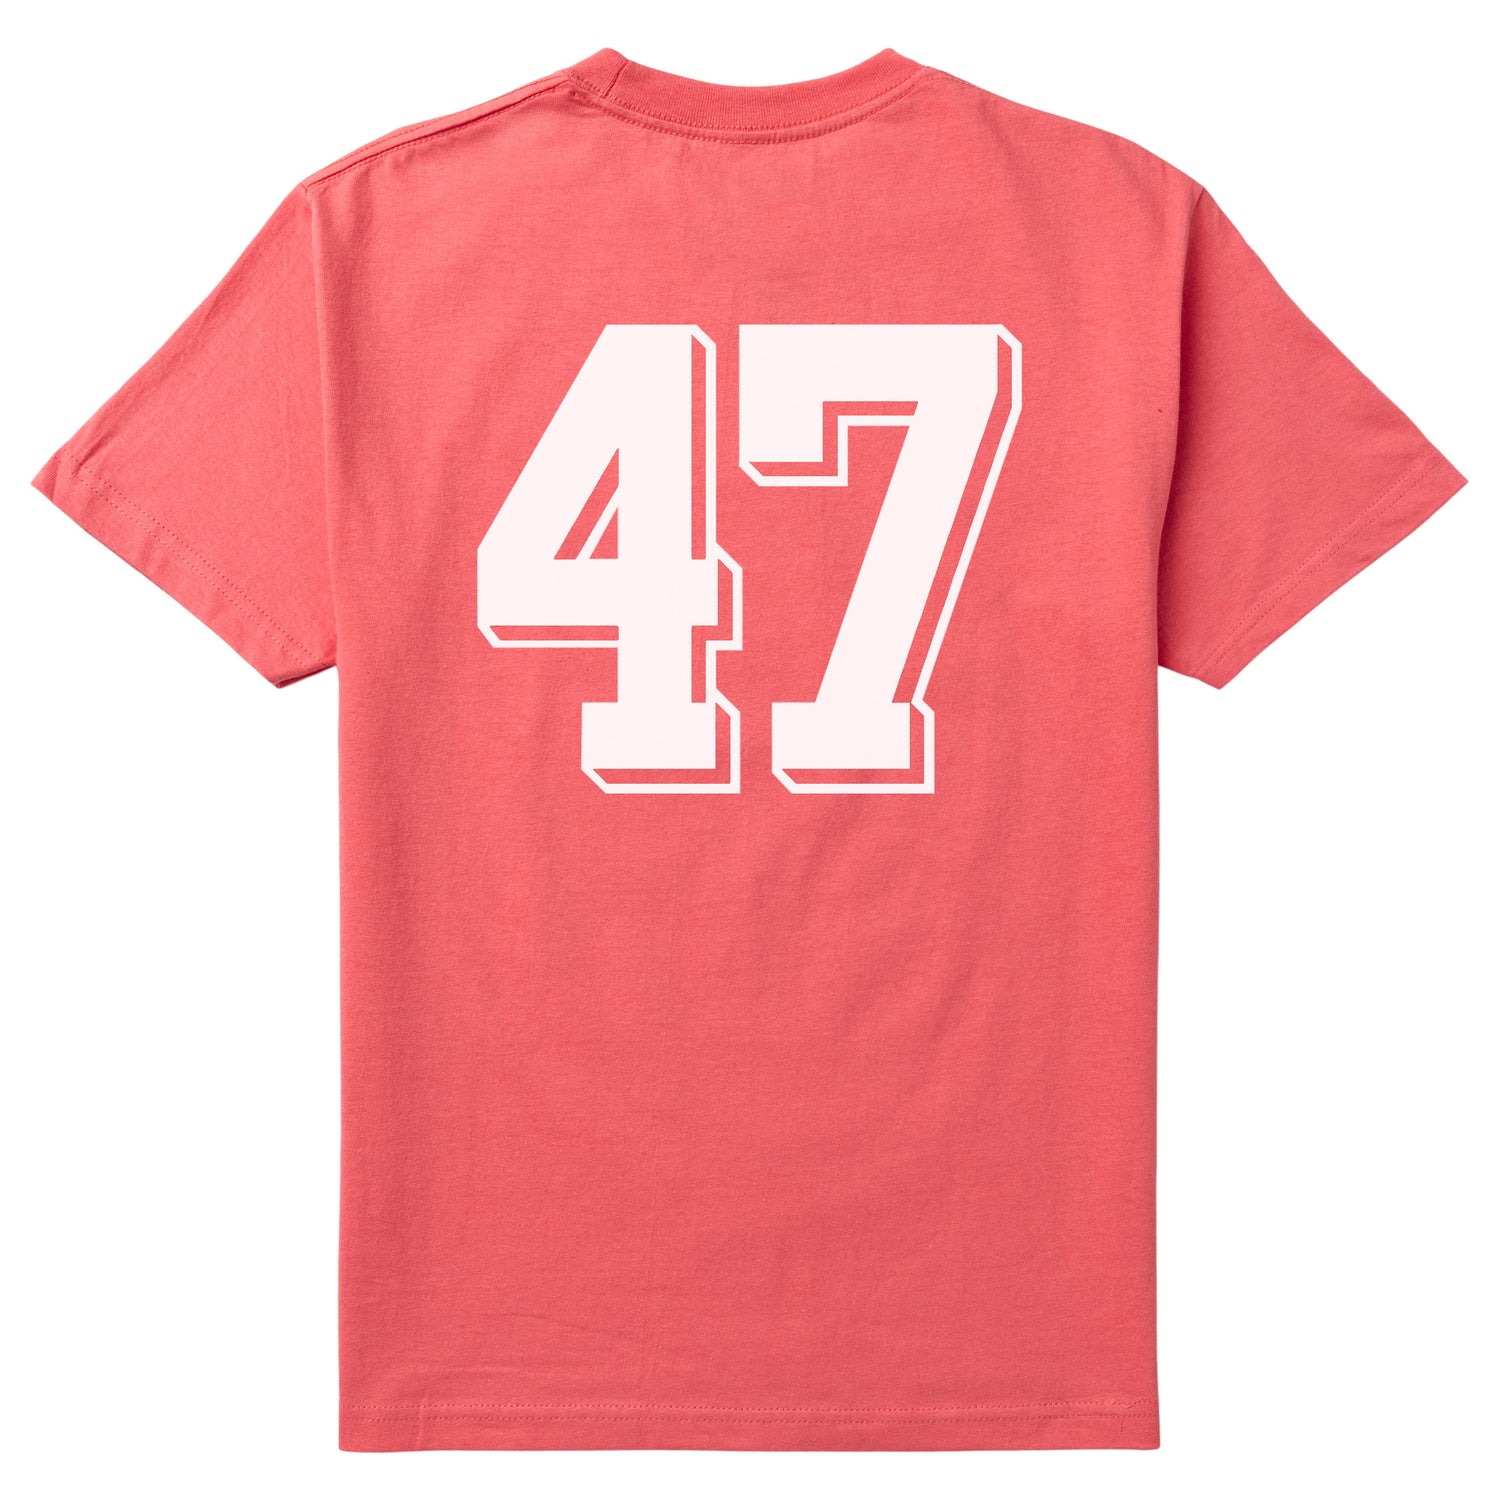 L RUGGER 47 TEE - CORAL